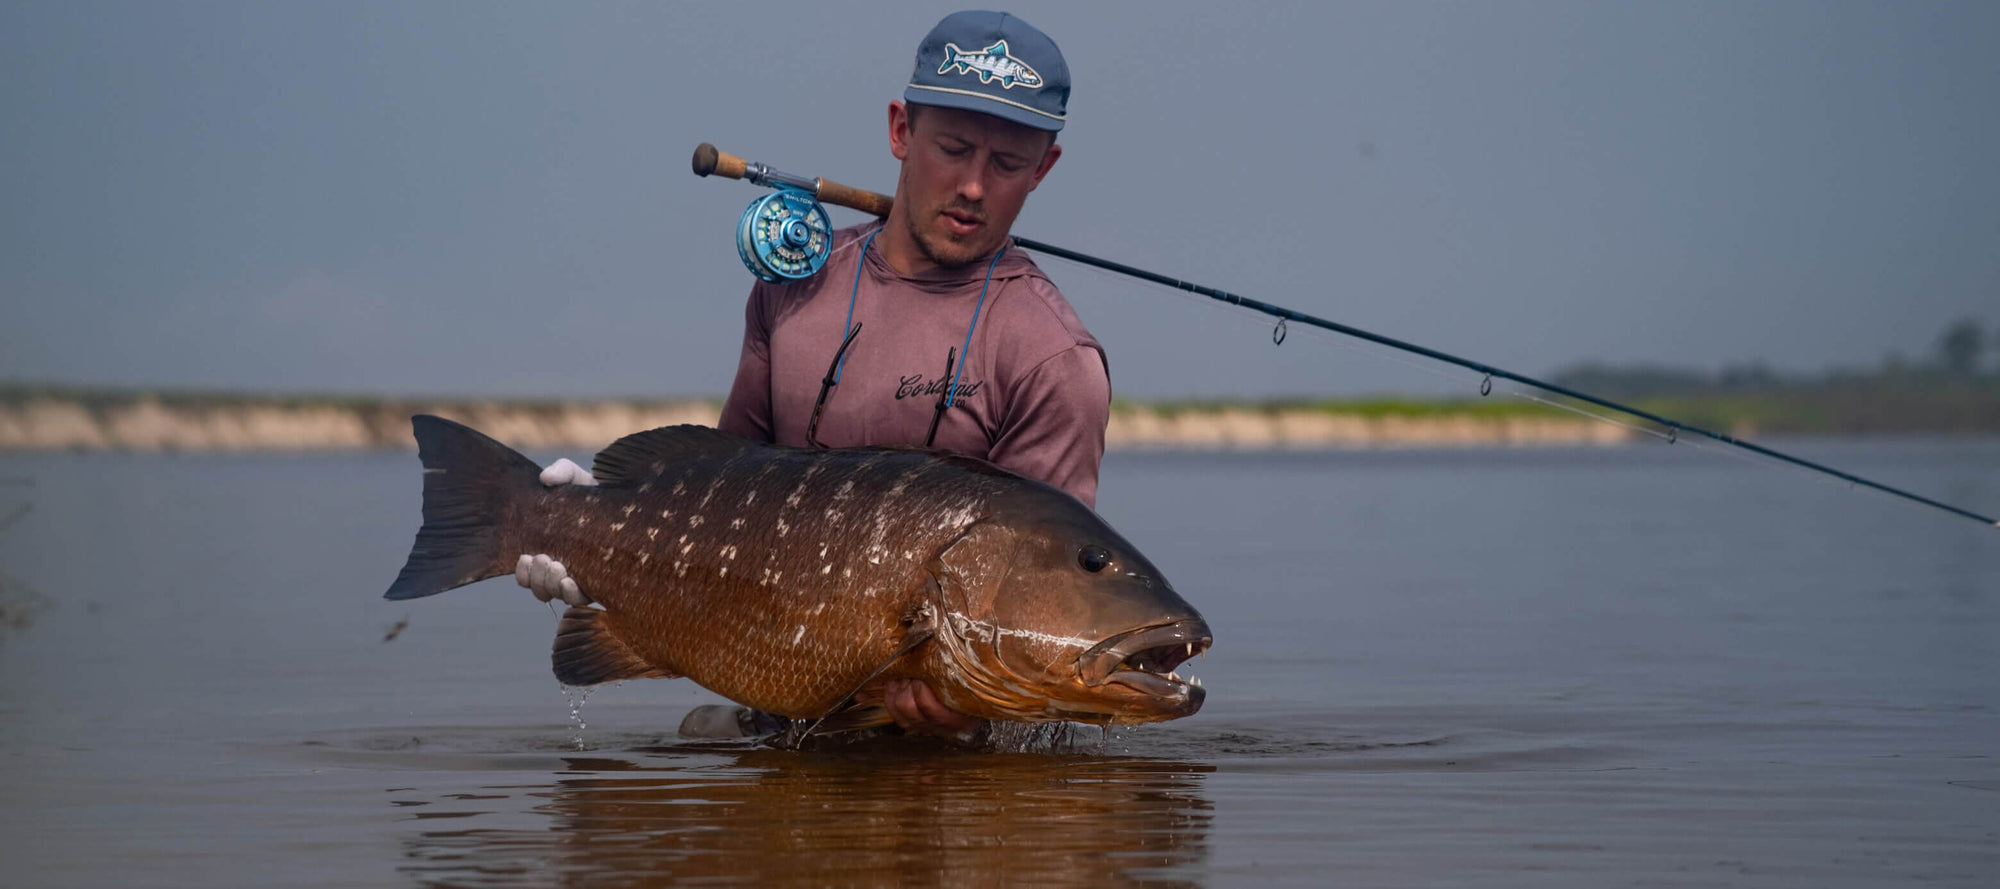 Angler standing in water, while holding onto a large brown fish